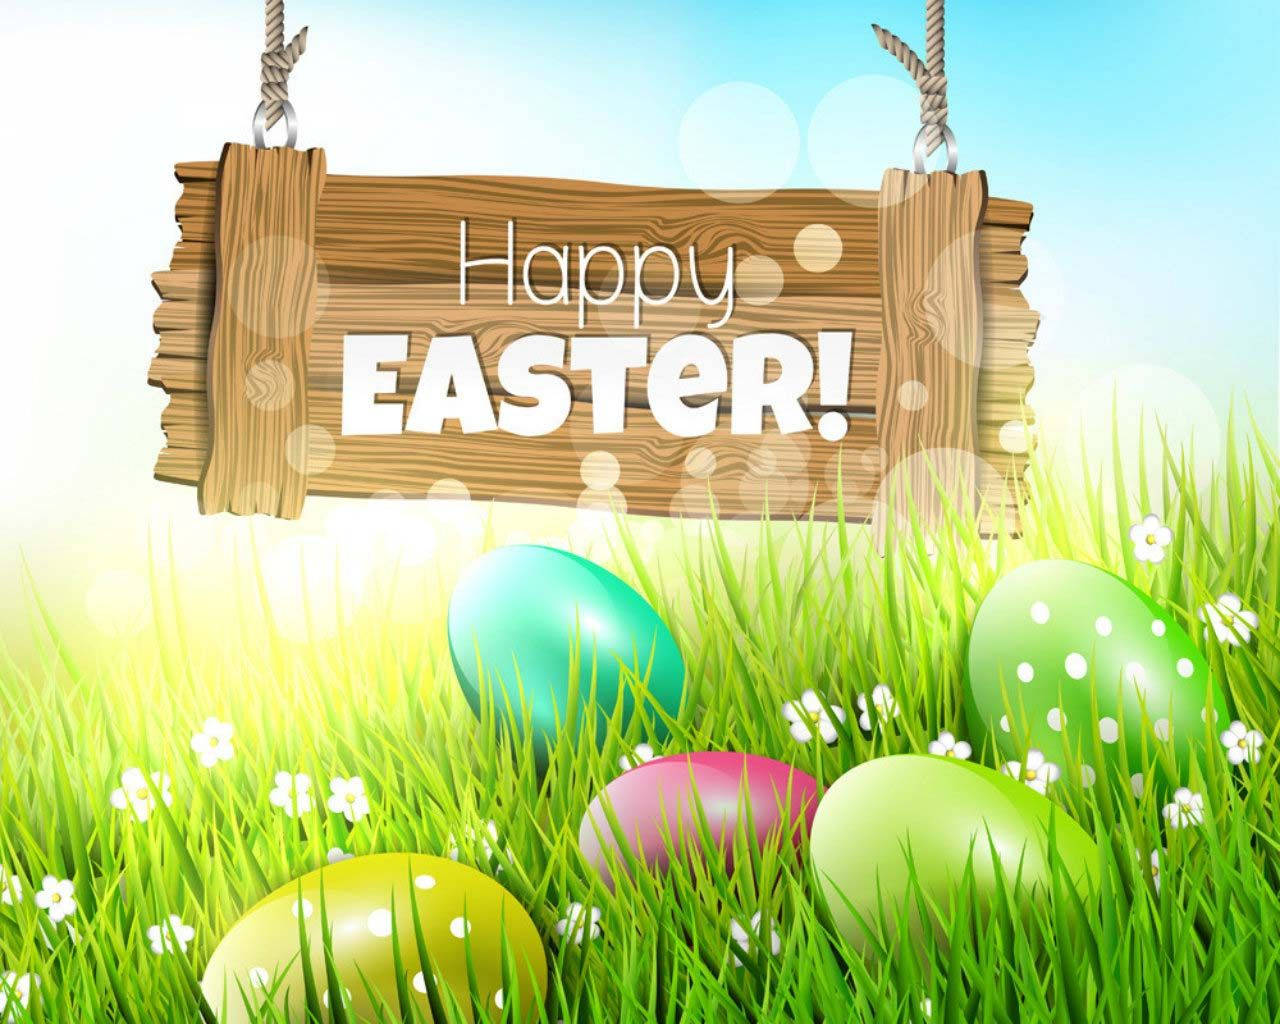 Happy Easter Greetings Background